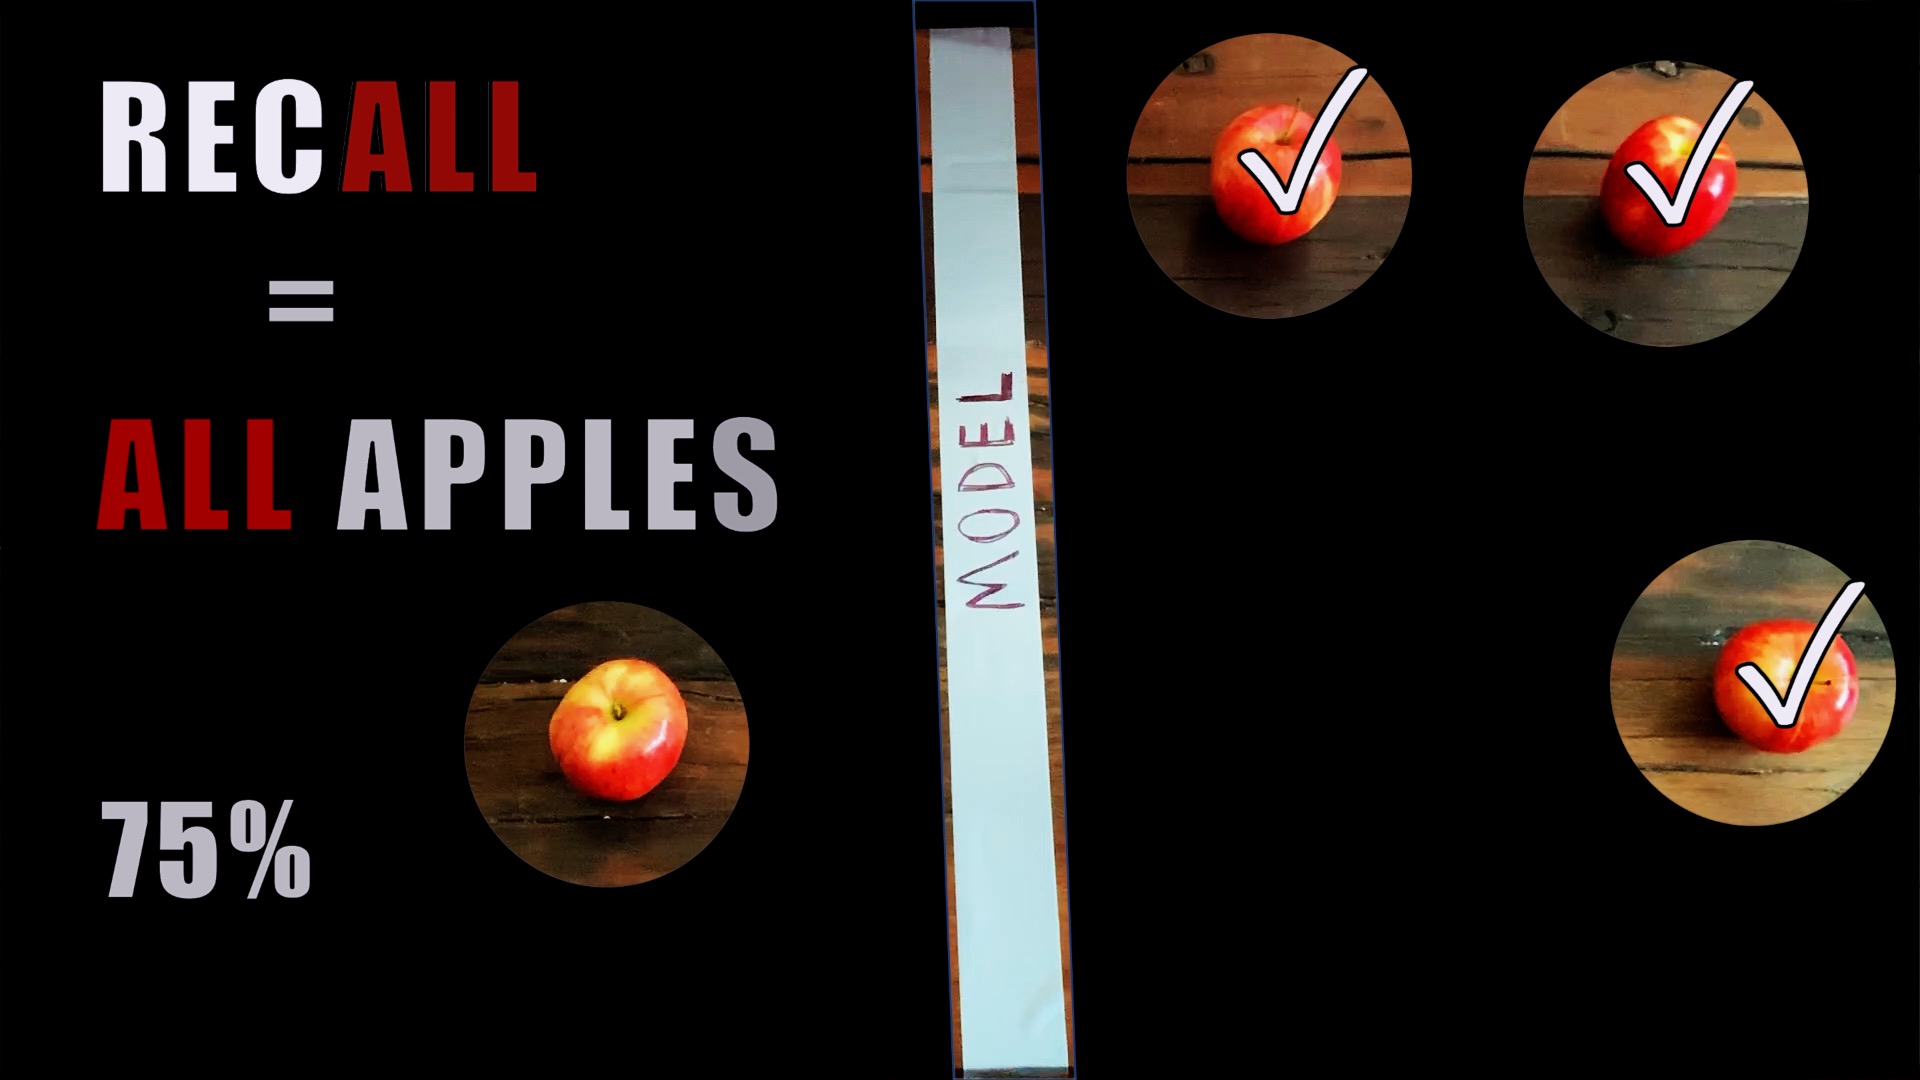 Recall calculated as 75% for the apple class from example apple-orange model